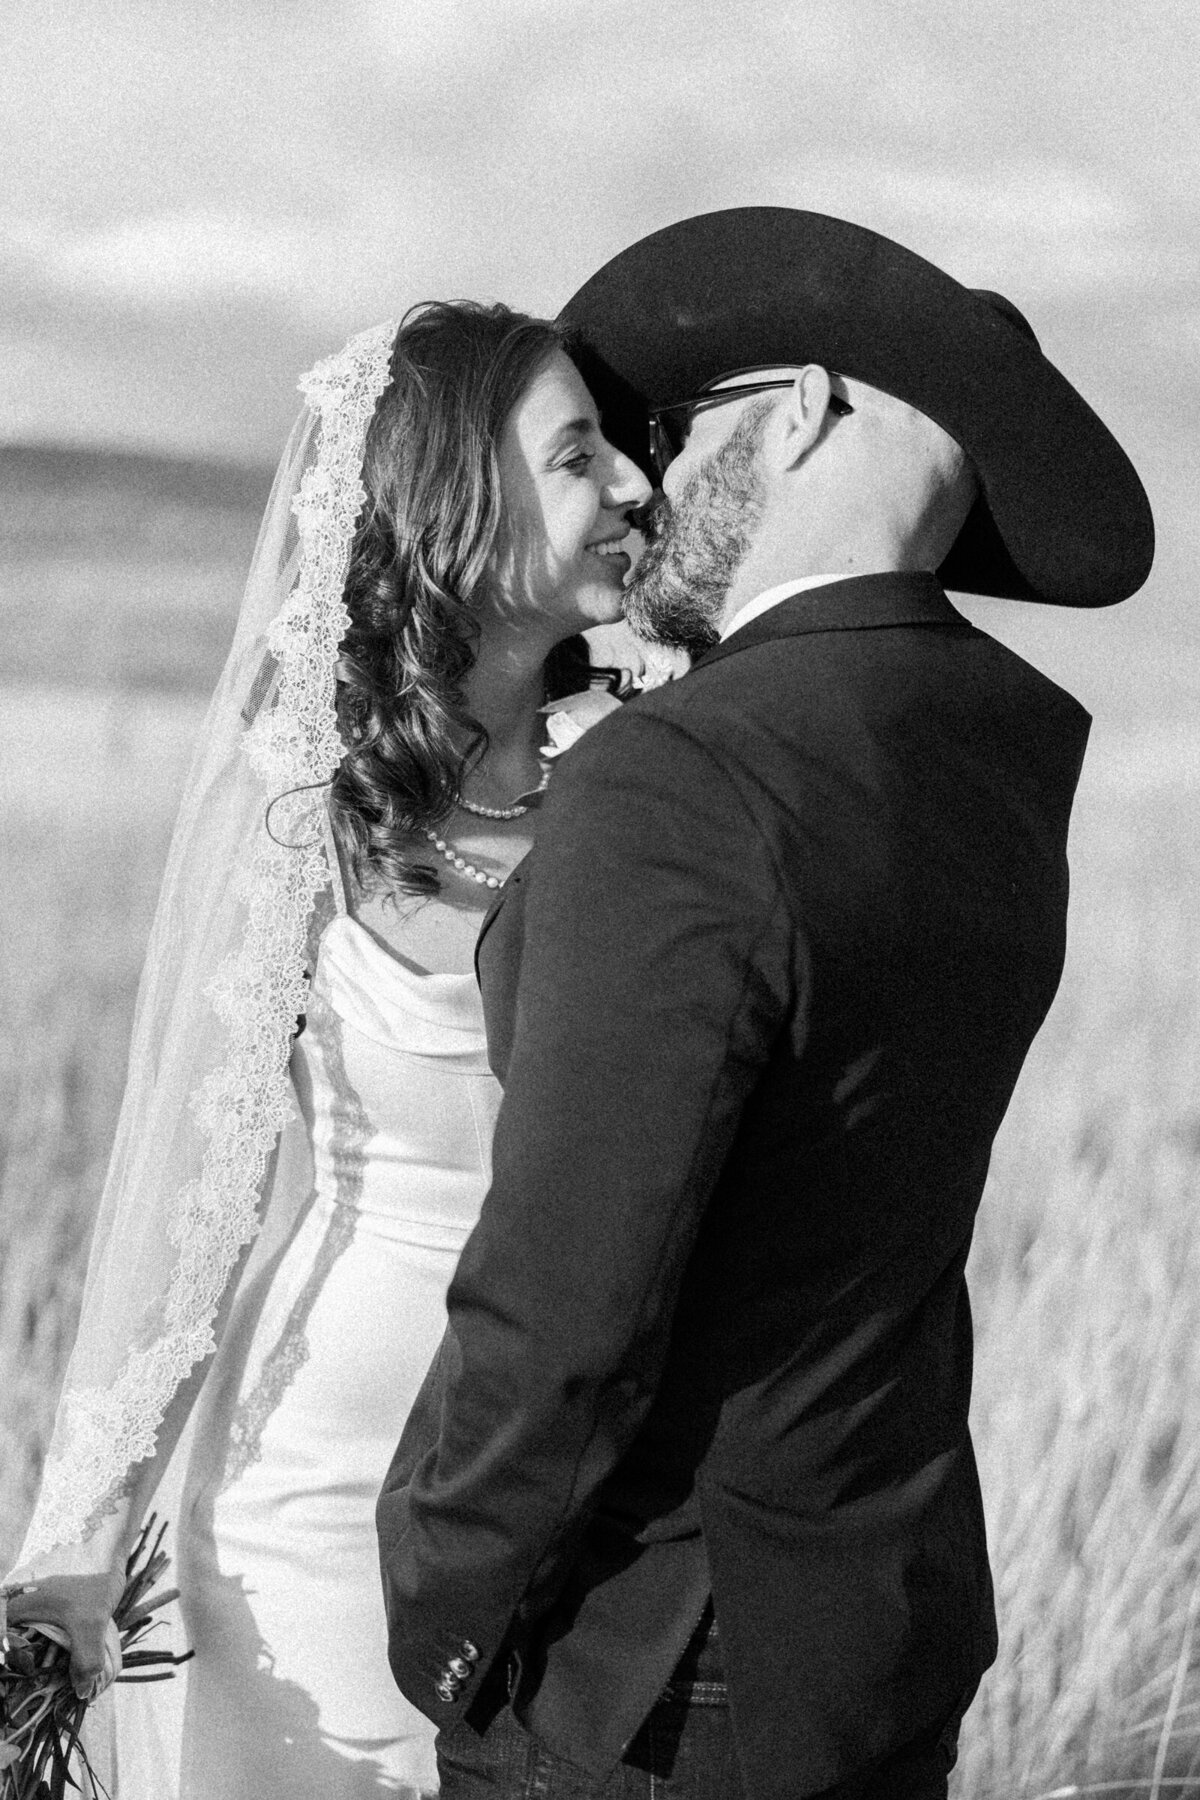 Steamboat_Springs_Ranch_wedding_Mary_Ann_craddock_photography_0044